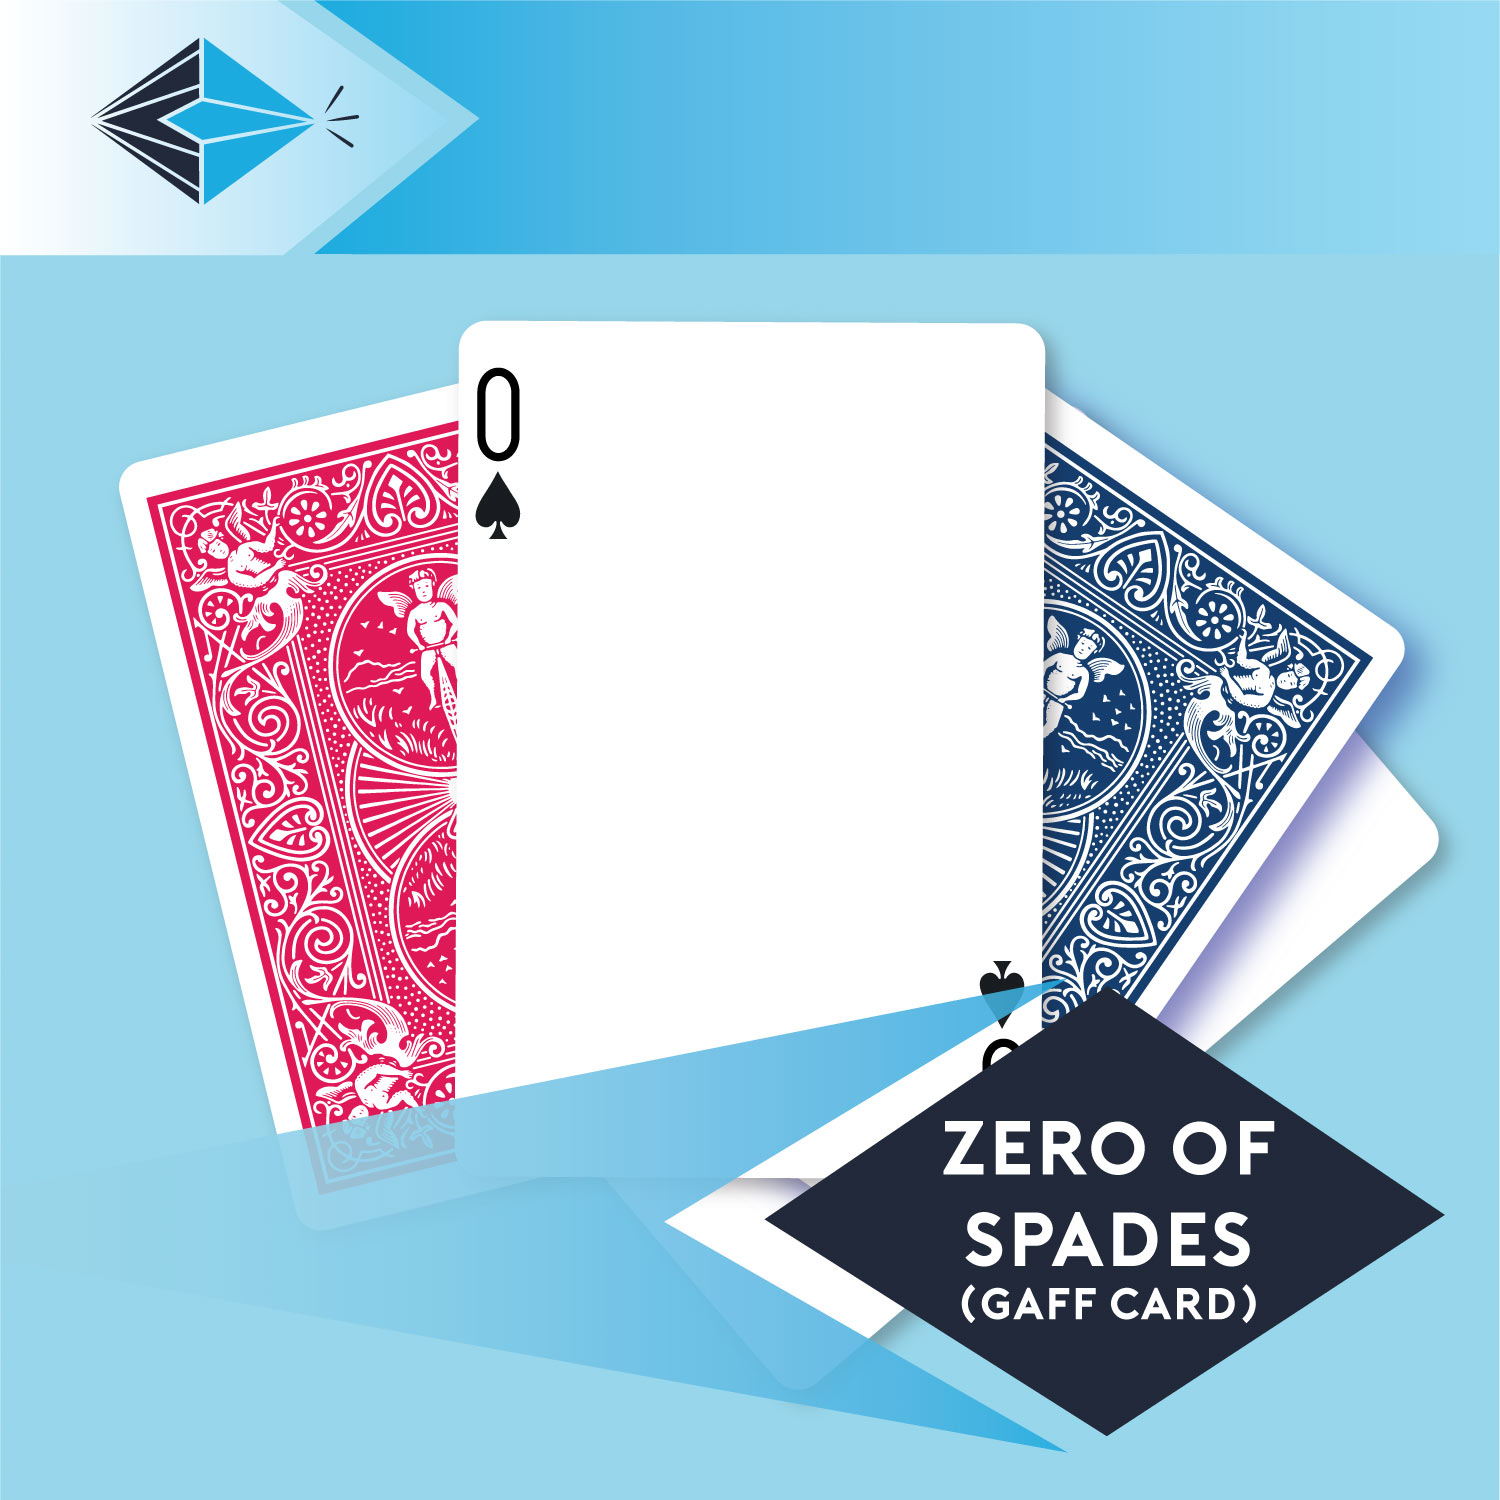 zero of spades gaff card 20 playing card for magicians printing printers Stockport Manchester UK